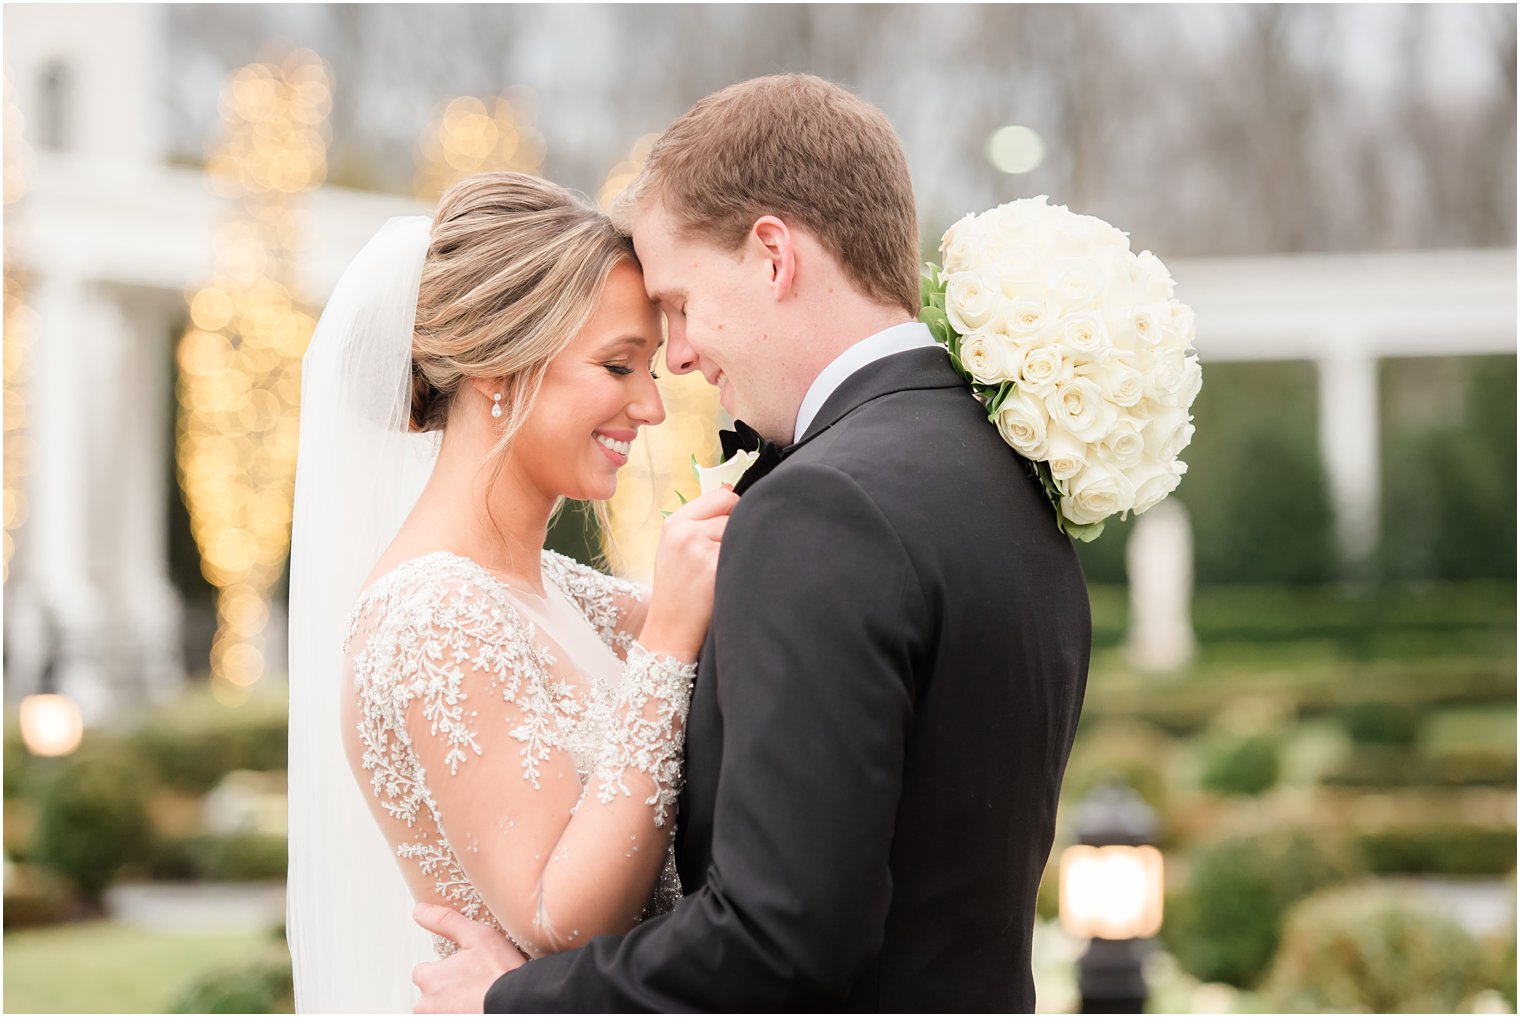 Bride and groom at Park Chateau Estate and Gardens | Winter wedding by Idalia Photography Associates